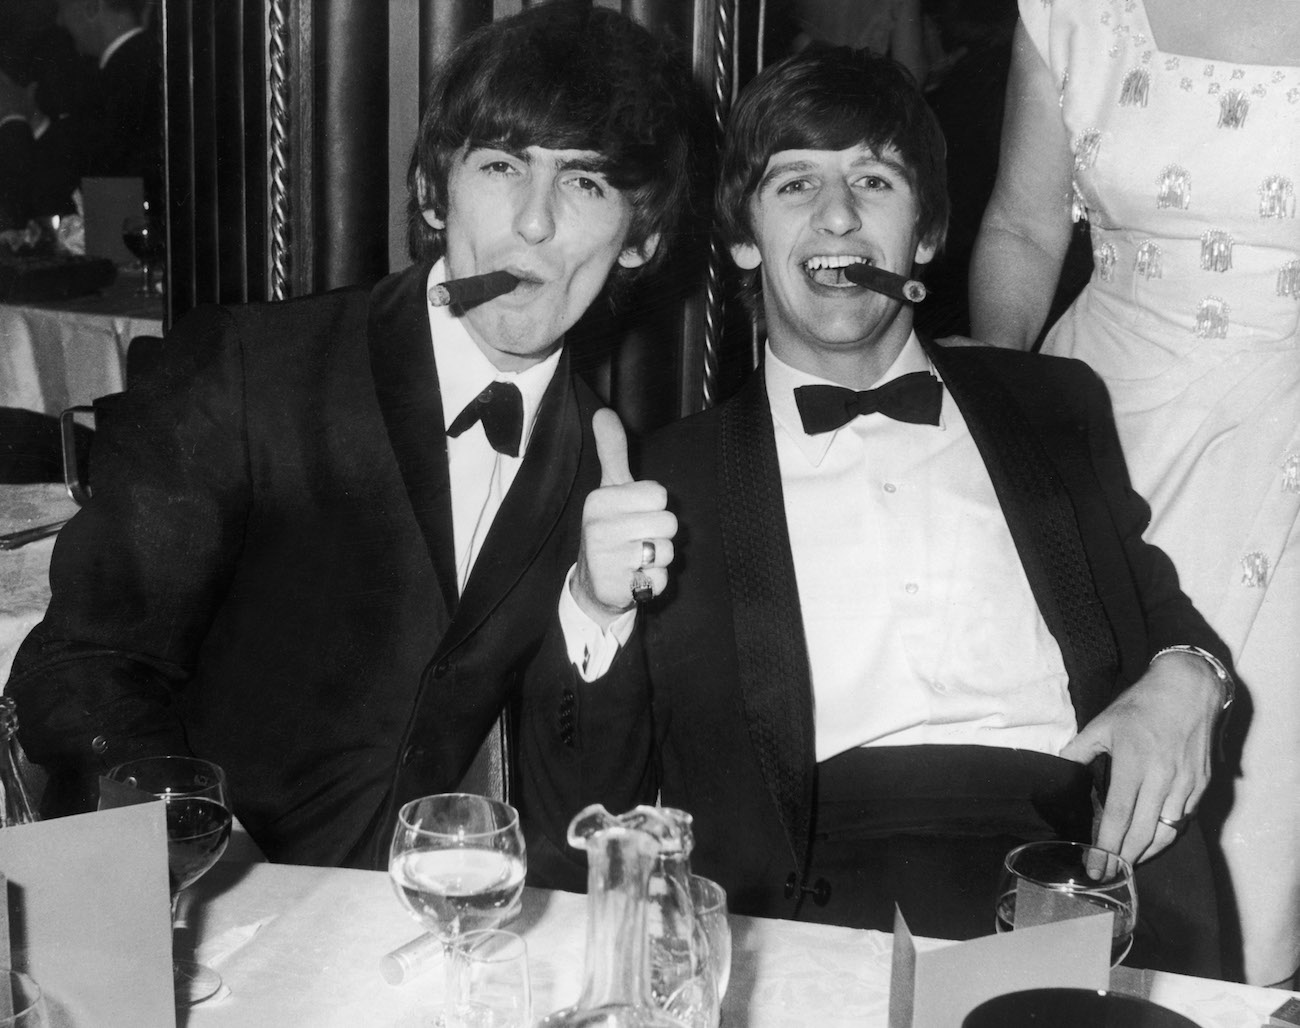 George Harrison and Ringo Starr out in the 1960s.